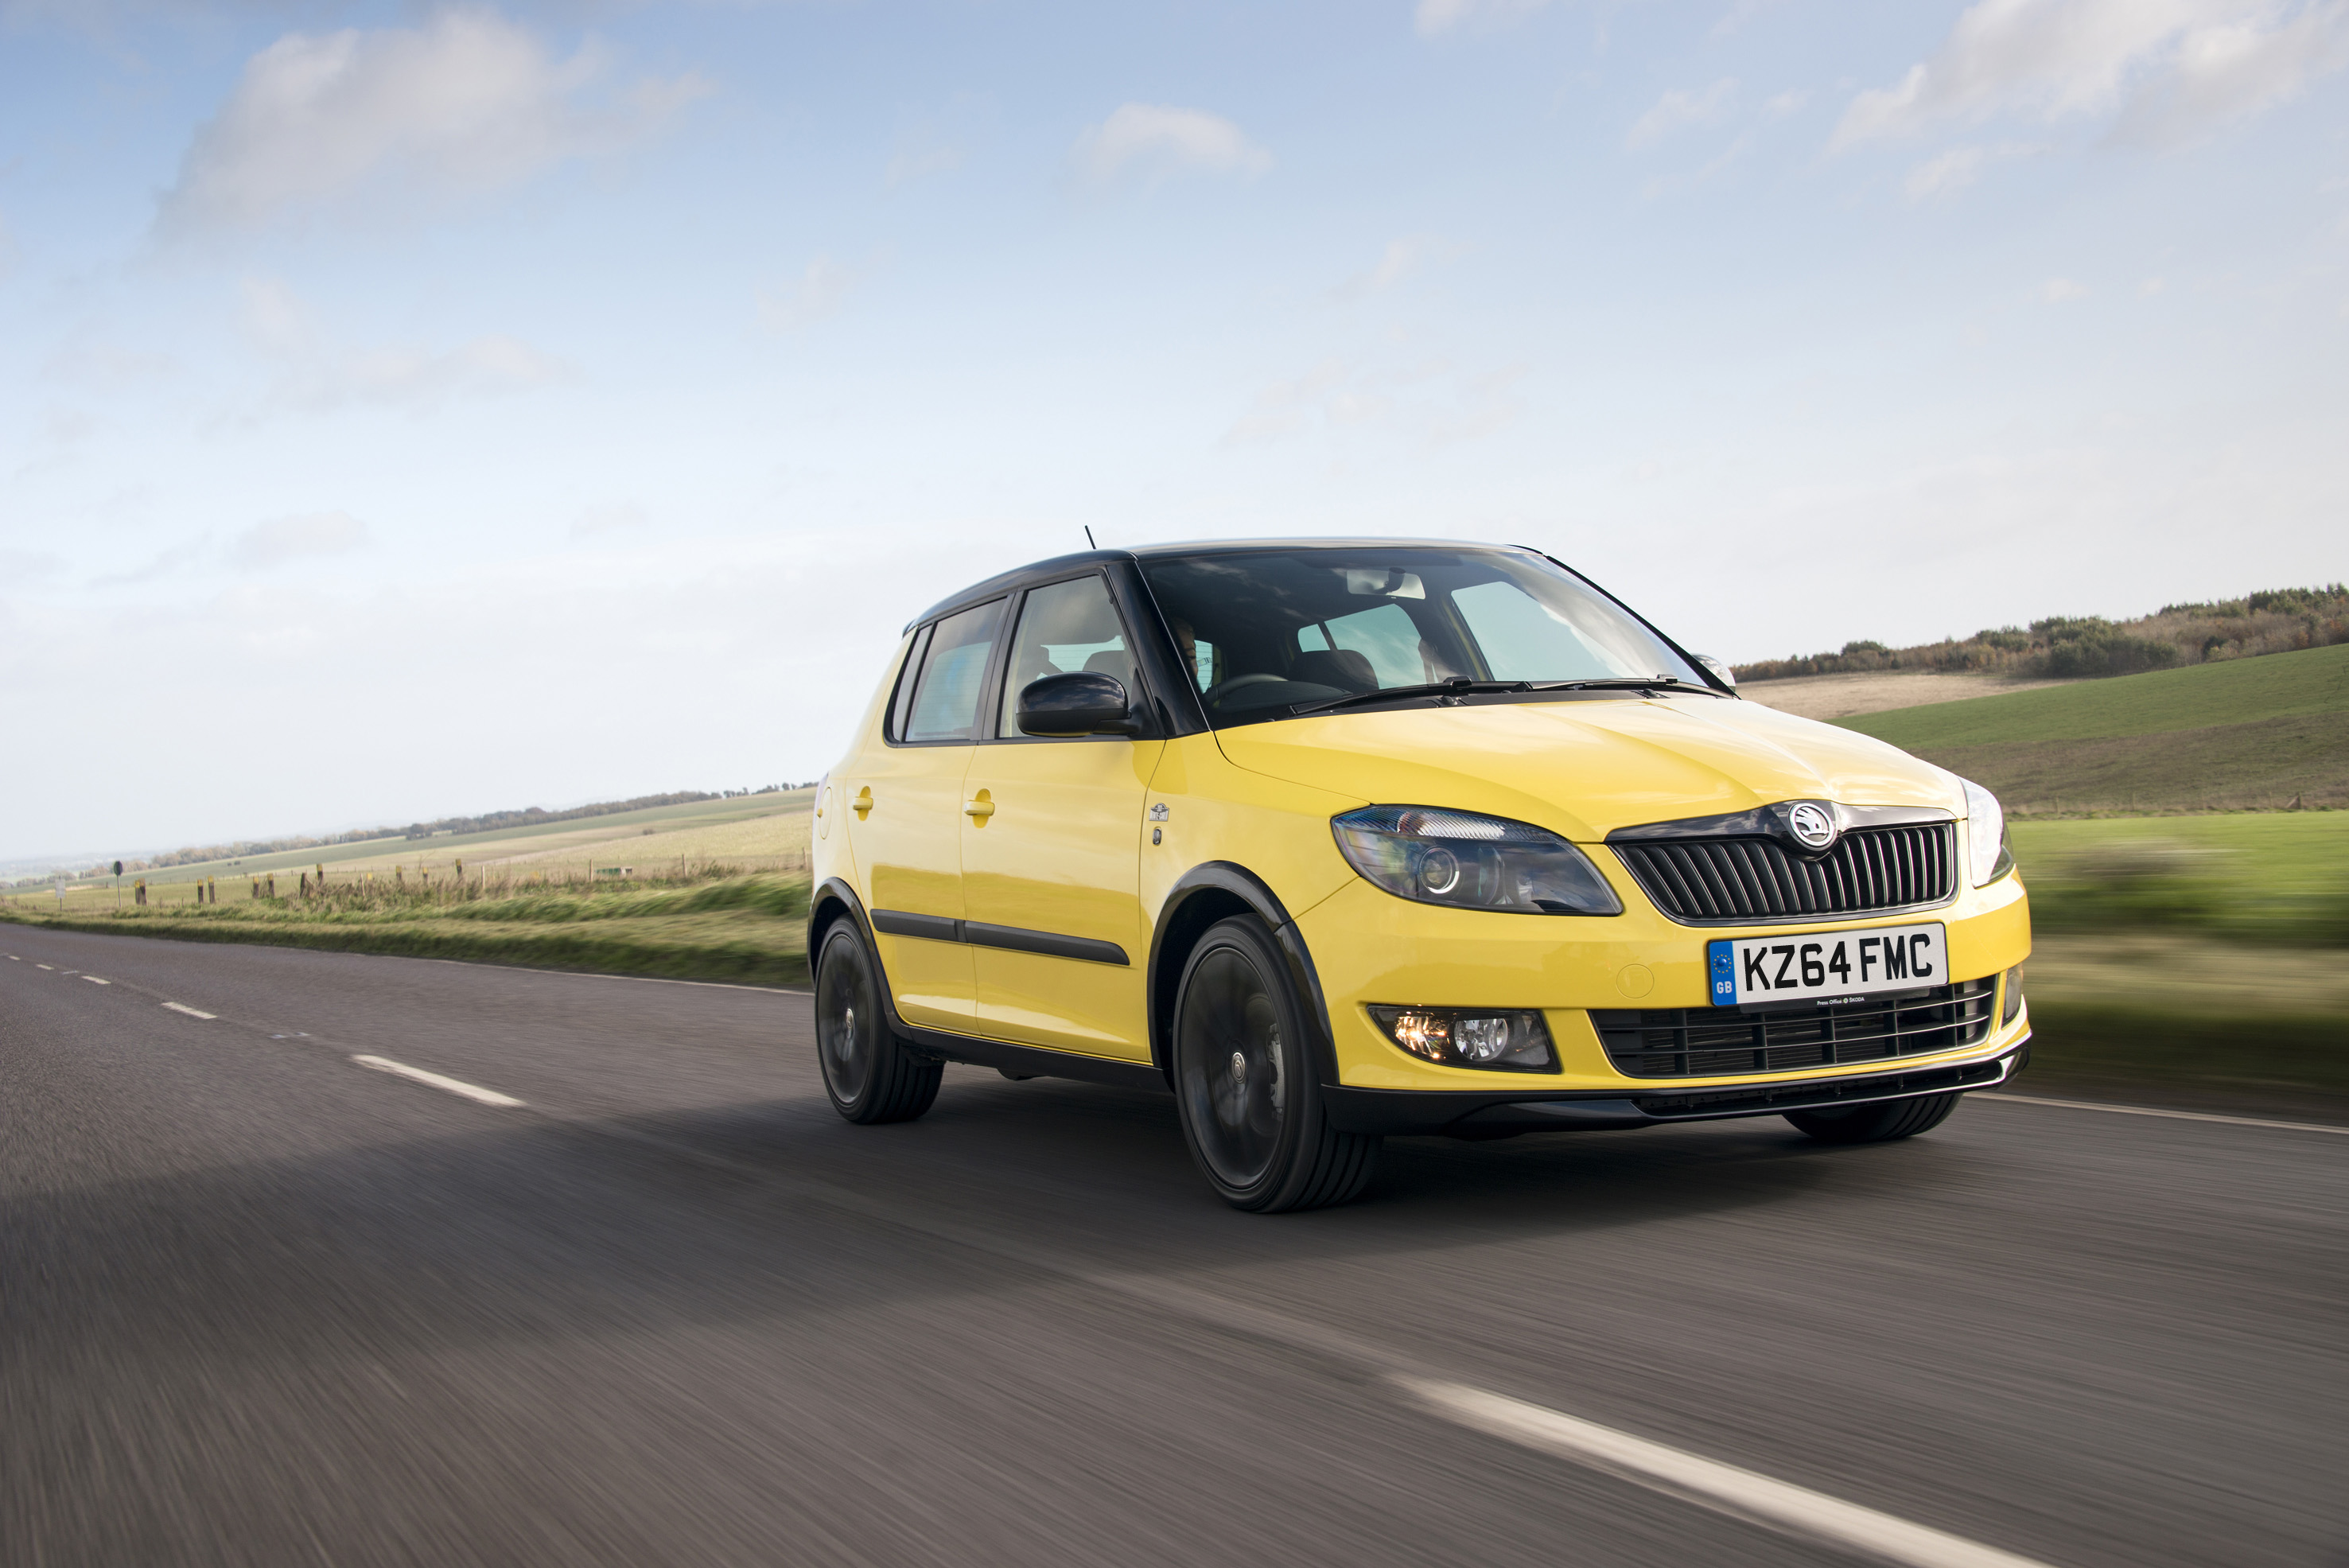 Cars for 150 a month: Skoda Fabia